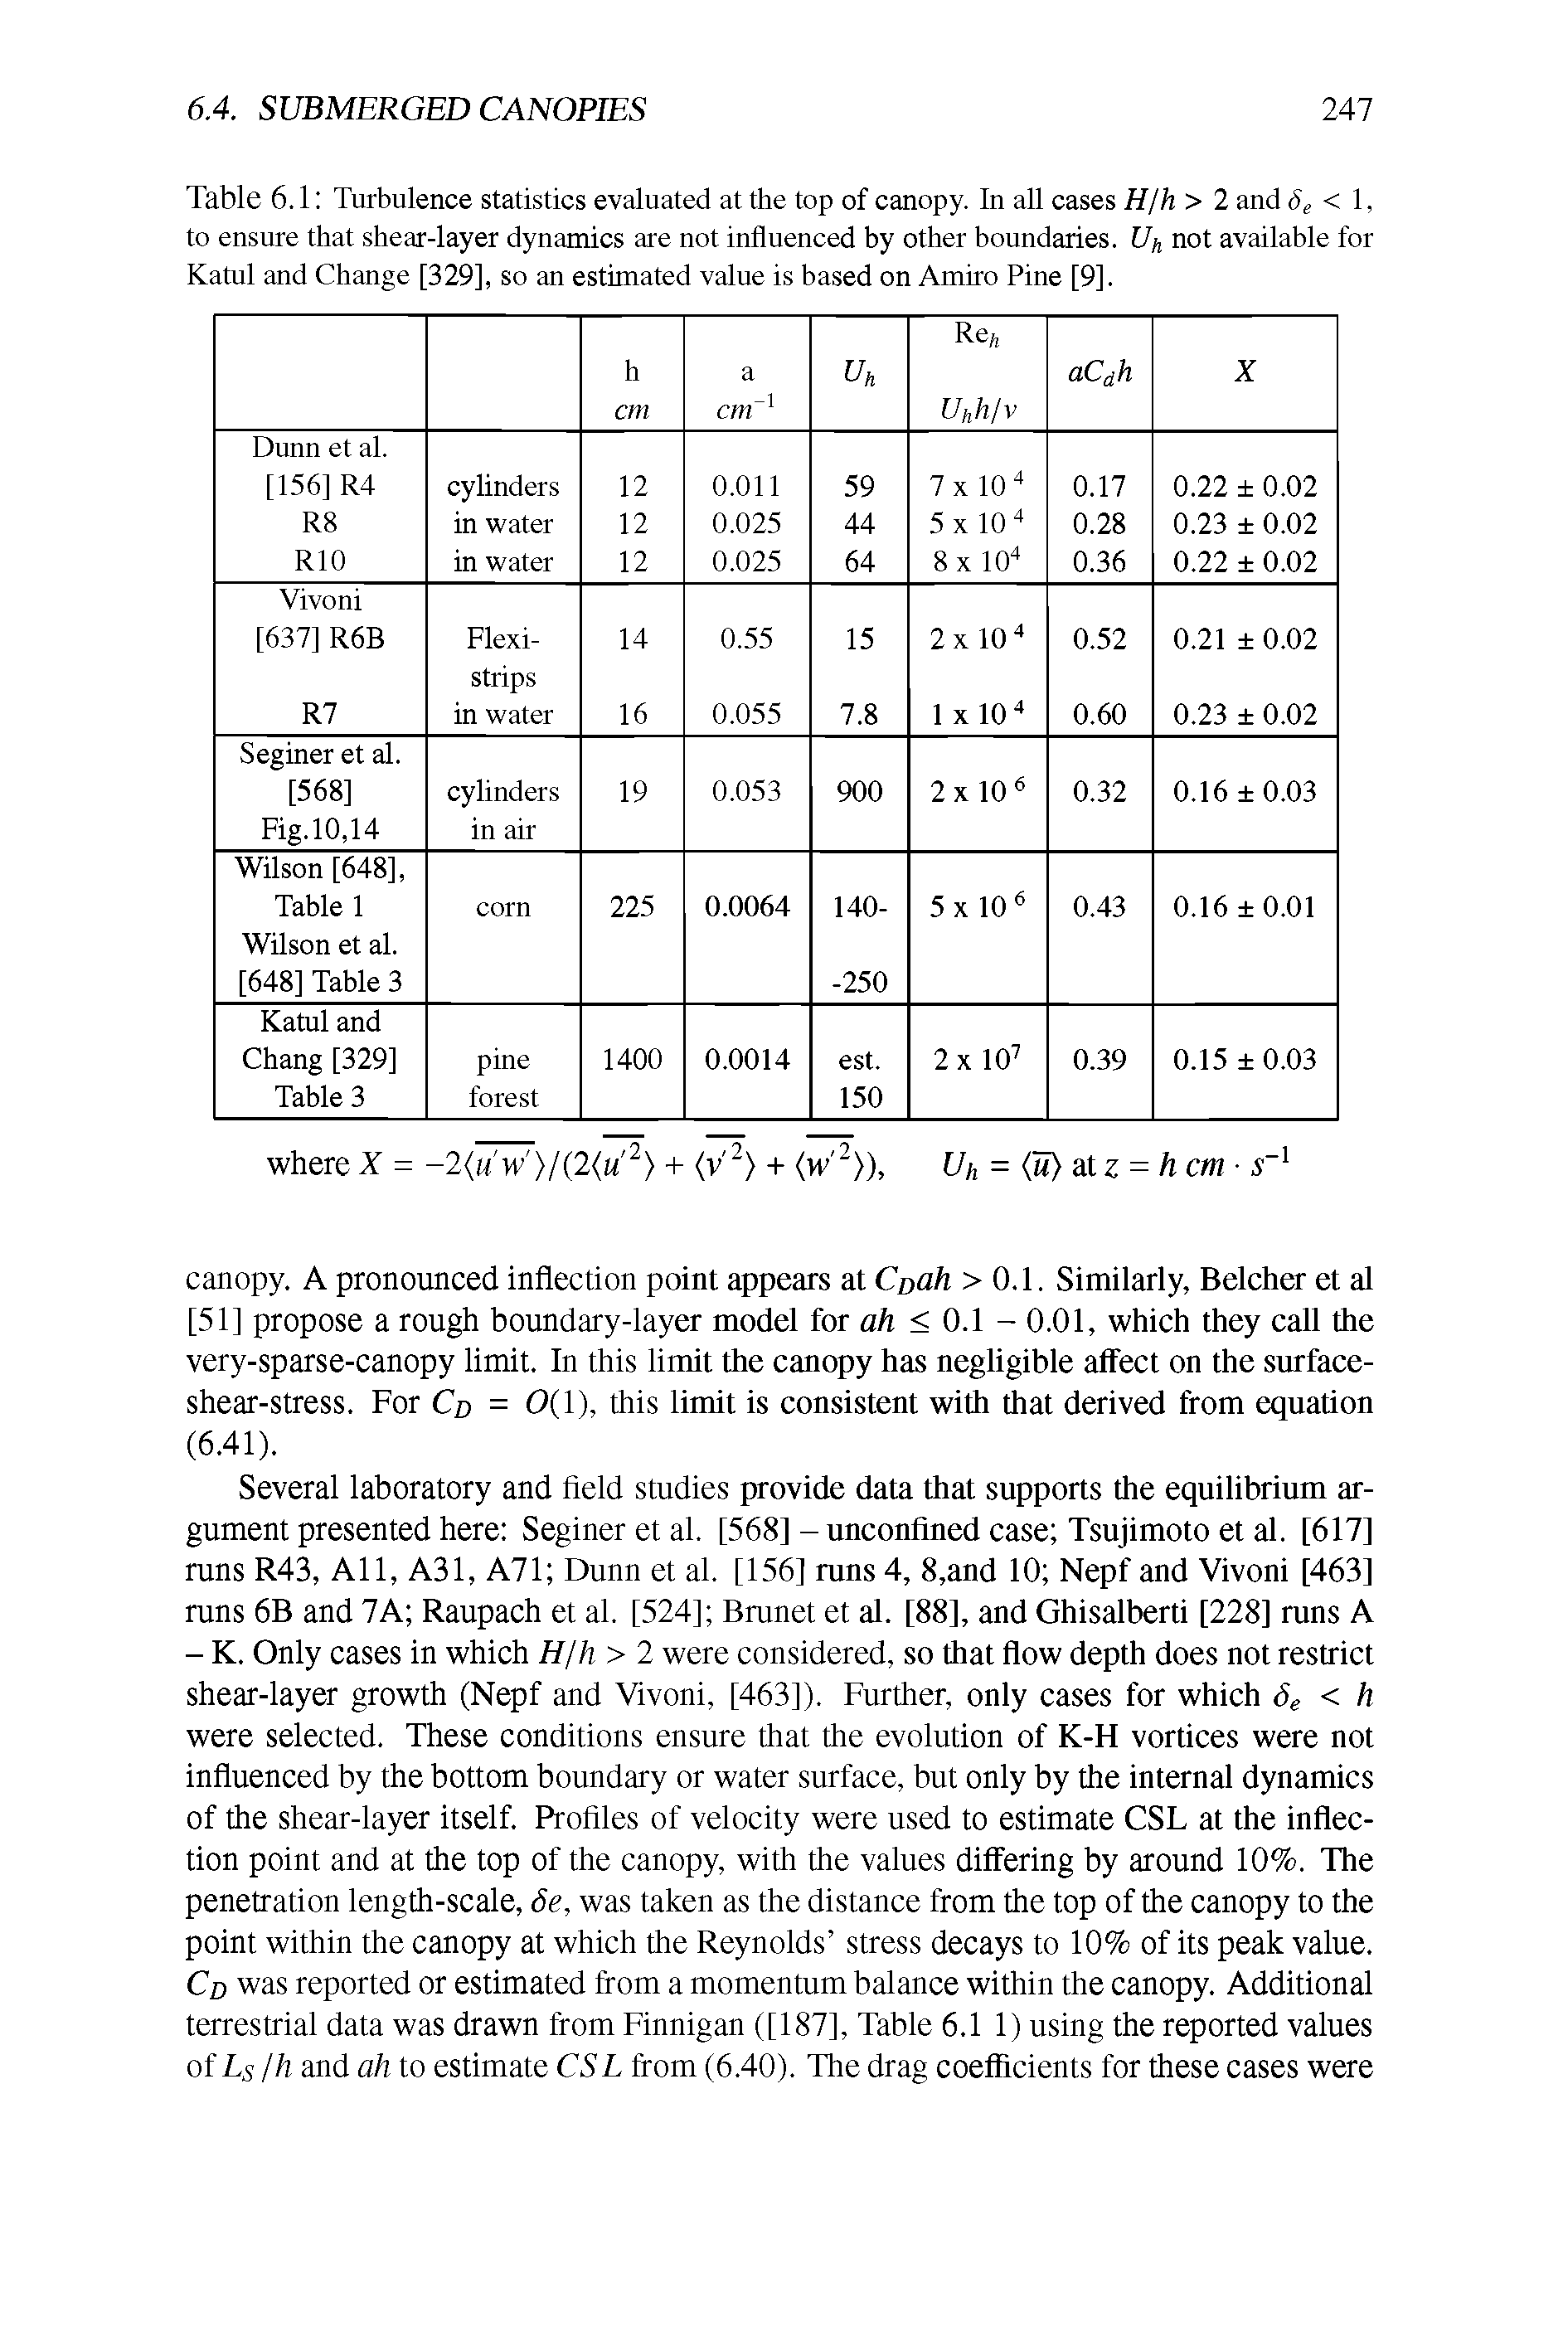 Table 6.1 Turbulence statistics evaluated at the top of canopy. In all cases H/h> 2 and 6e < 1, to ensure that shear-layer dynamics are not influenced by other boundaries. Uh not available for Katul and Change [329], so an estimated value is based on Amiro Pine [9].